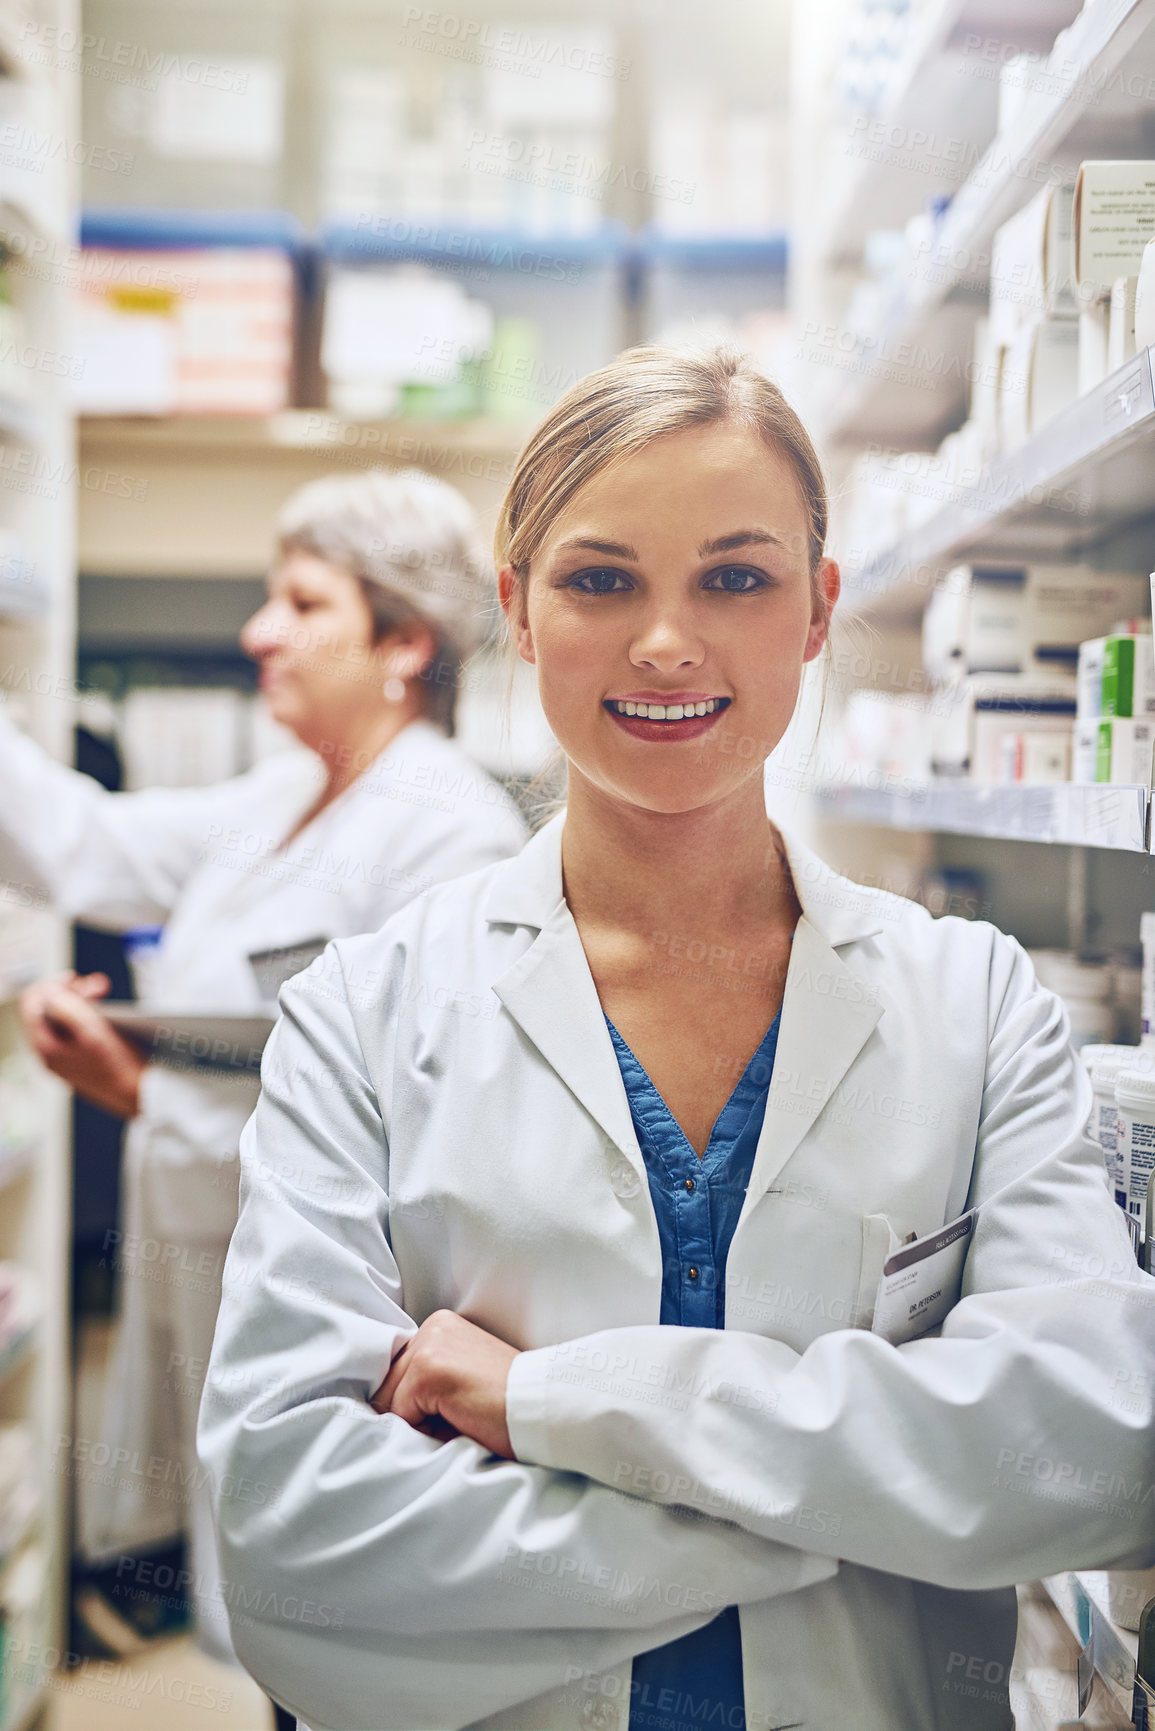 Buy stock photo Portrait of a pharmacist standing in a isle with her colleague working in the background